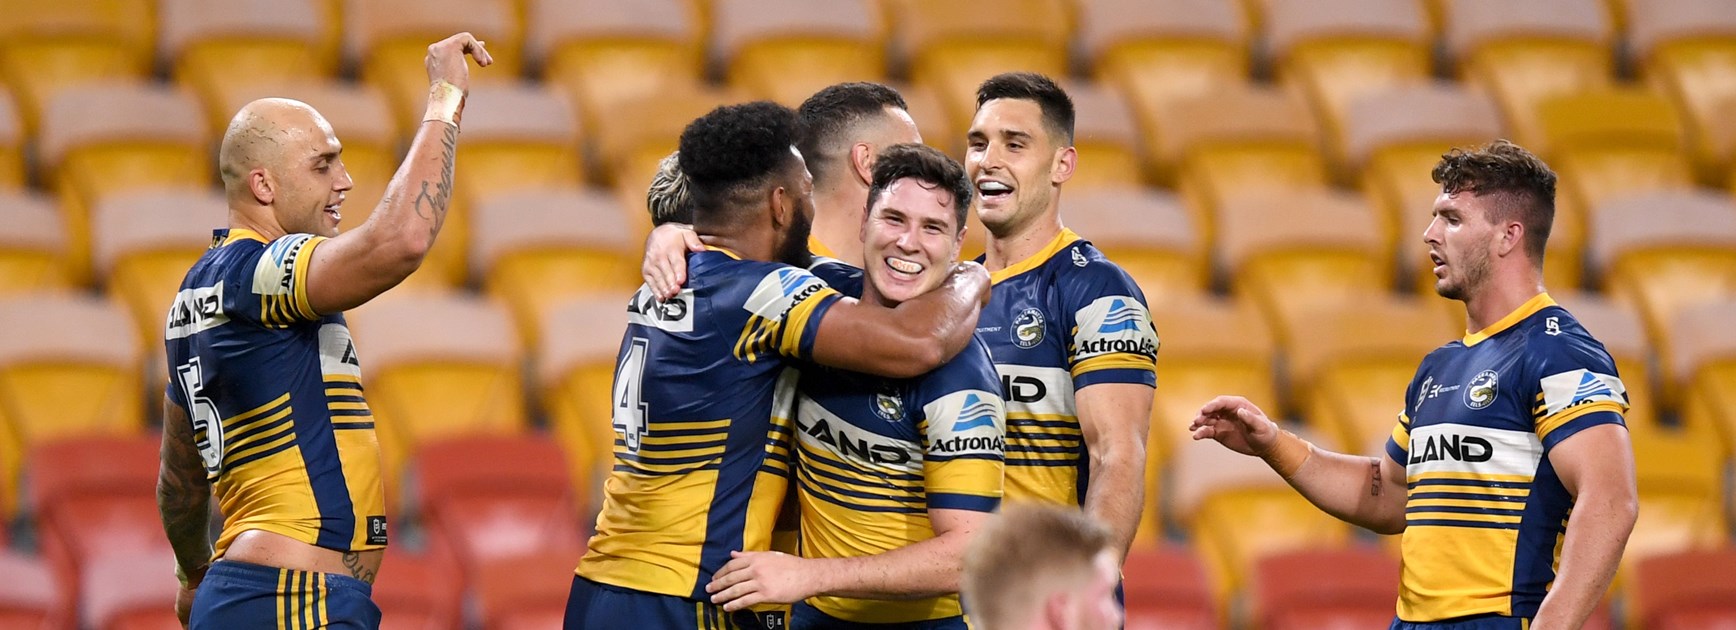 Eels players celebrate a try against Brisbane in front of empty stands in round 3, 2020.